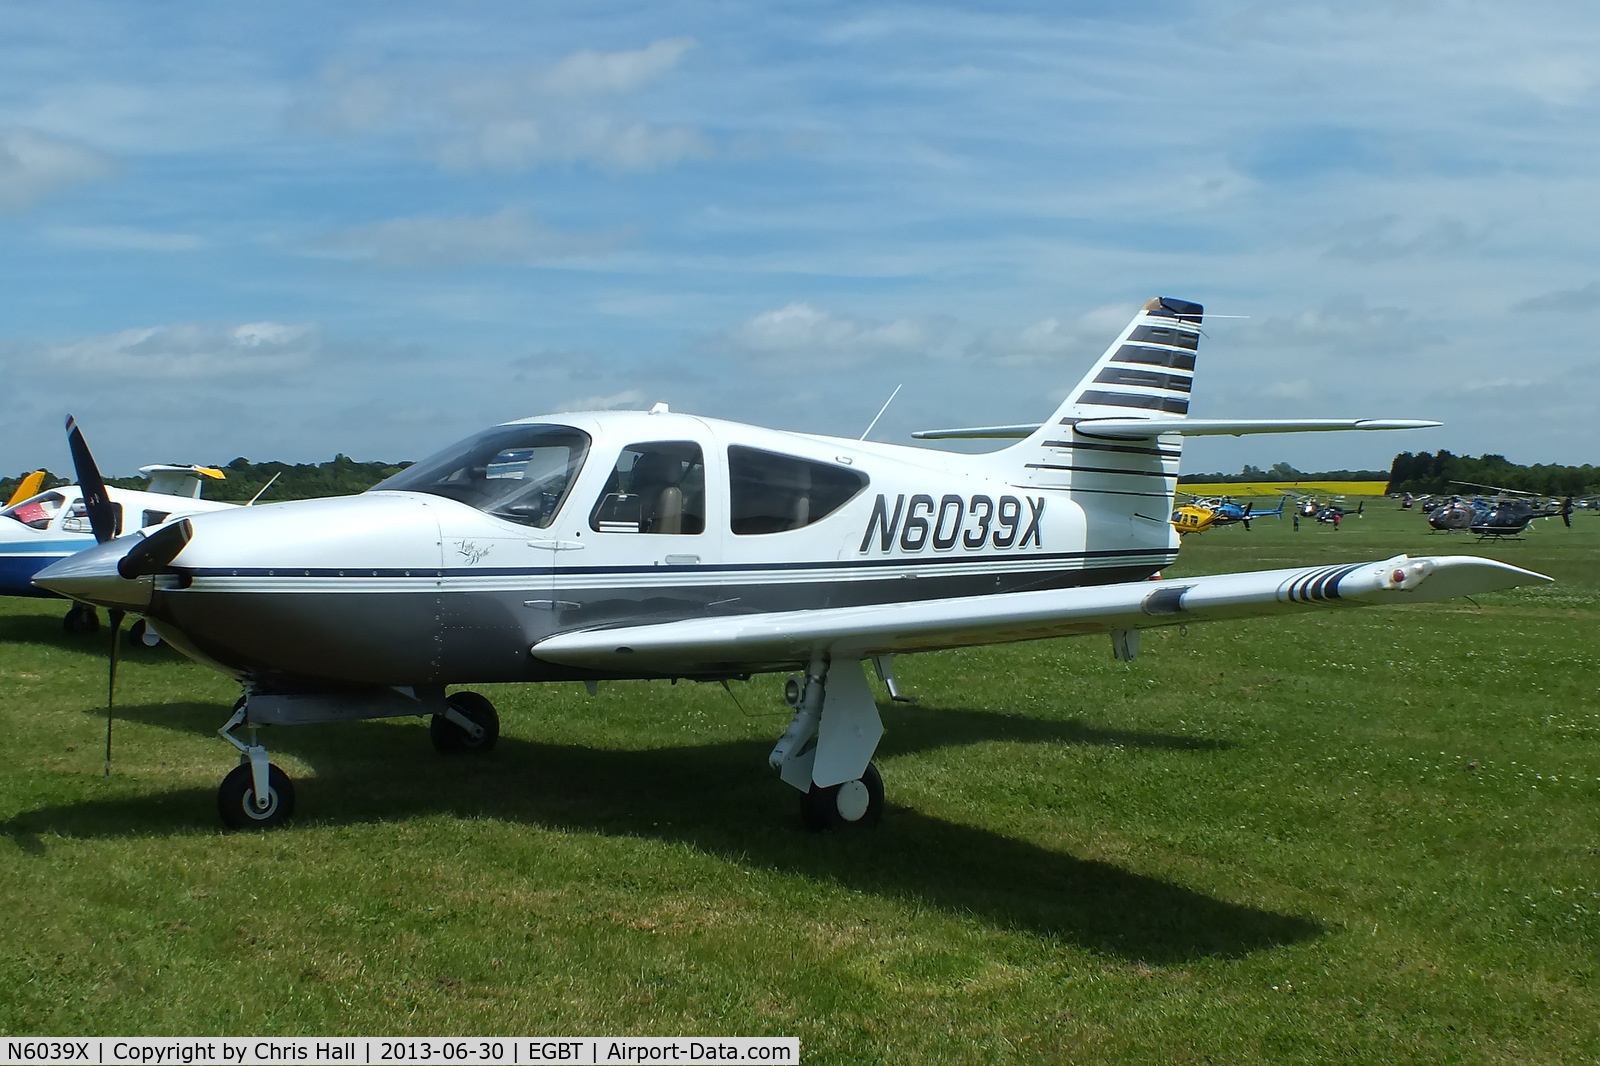 N6039X, 1995 Rockwell Commander 114-B C/N 14639, Visitor at Turweston for the British F1 Grand Prix at Silverstone